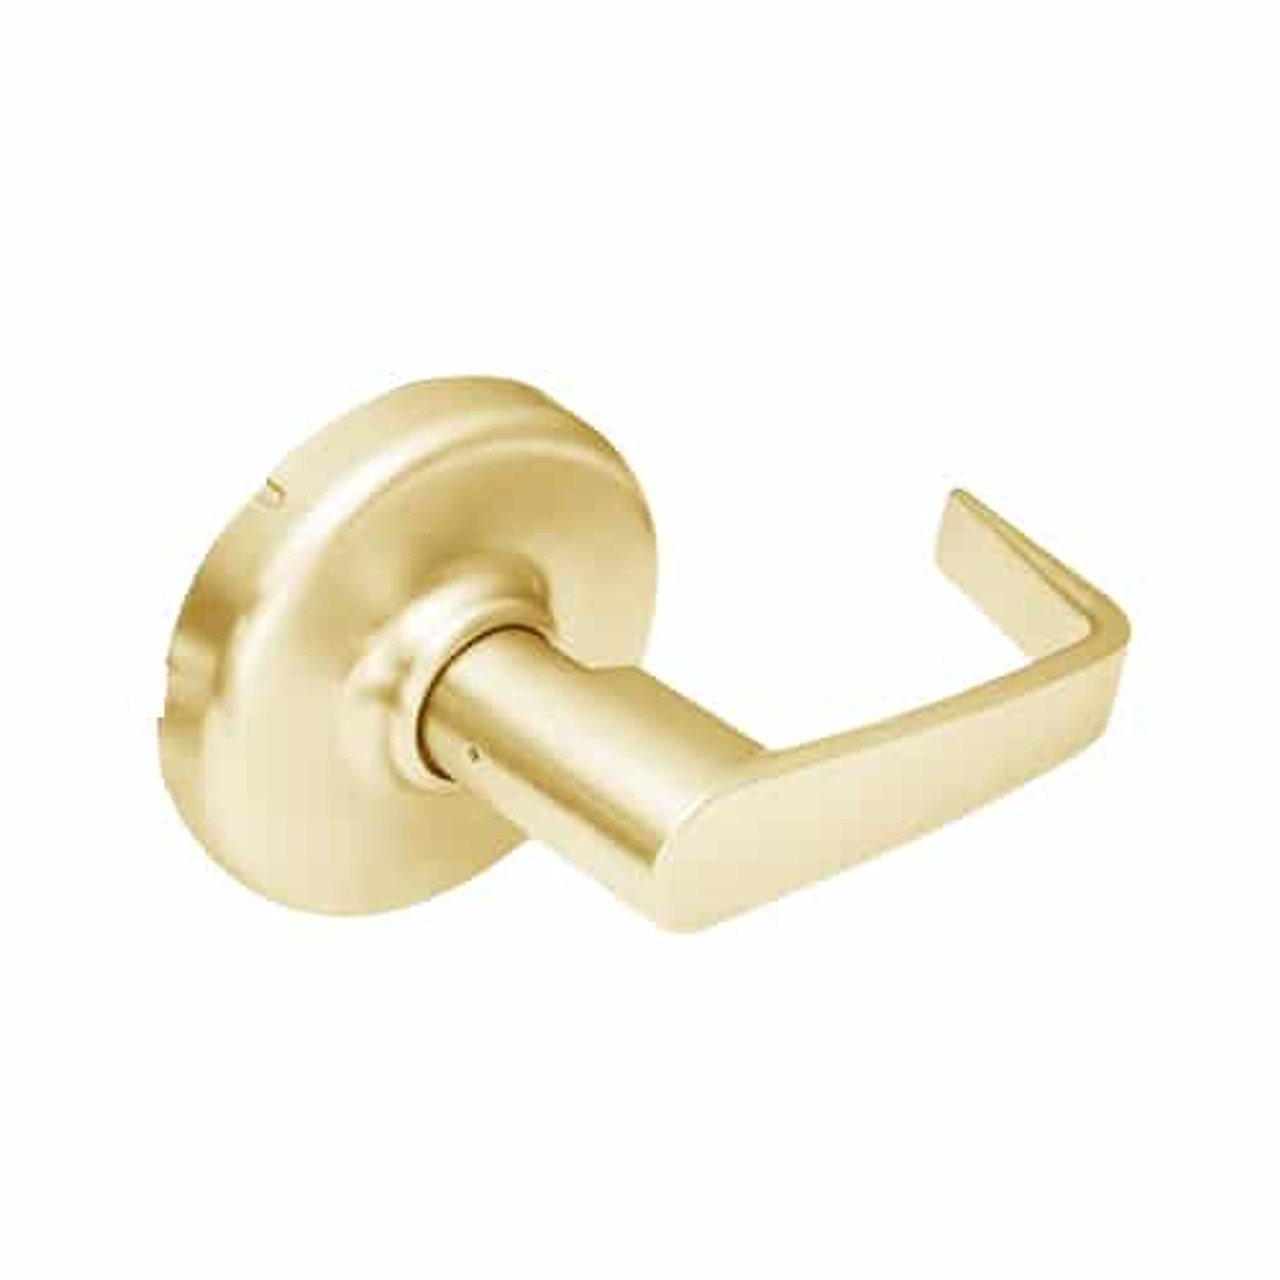 CL3550-NZD-605 Corbin CL3500 Series Heavy Duty Half Dummy Cylindrical Locksets with Newport Lever in Bright Brass Finish